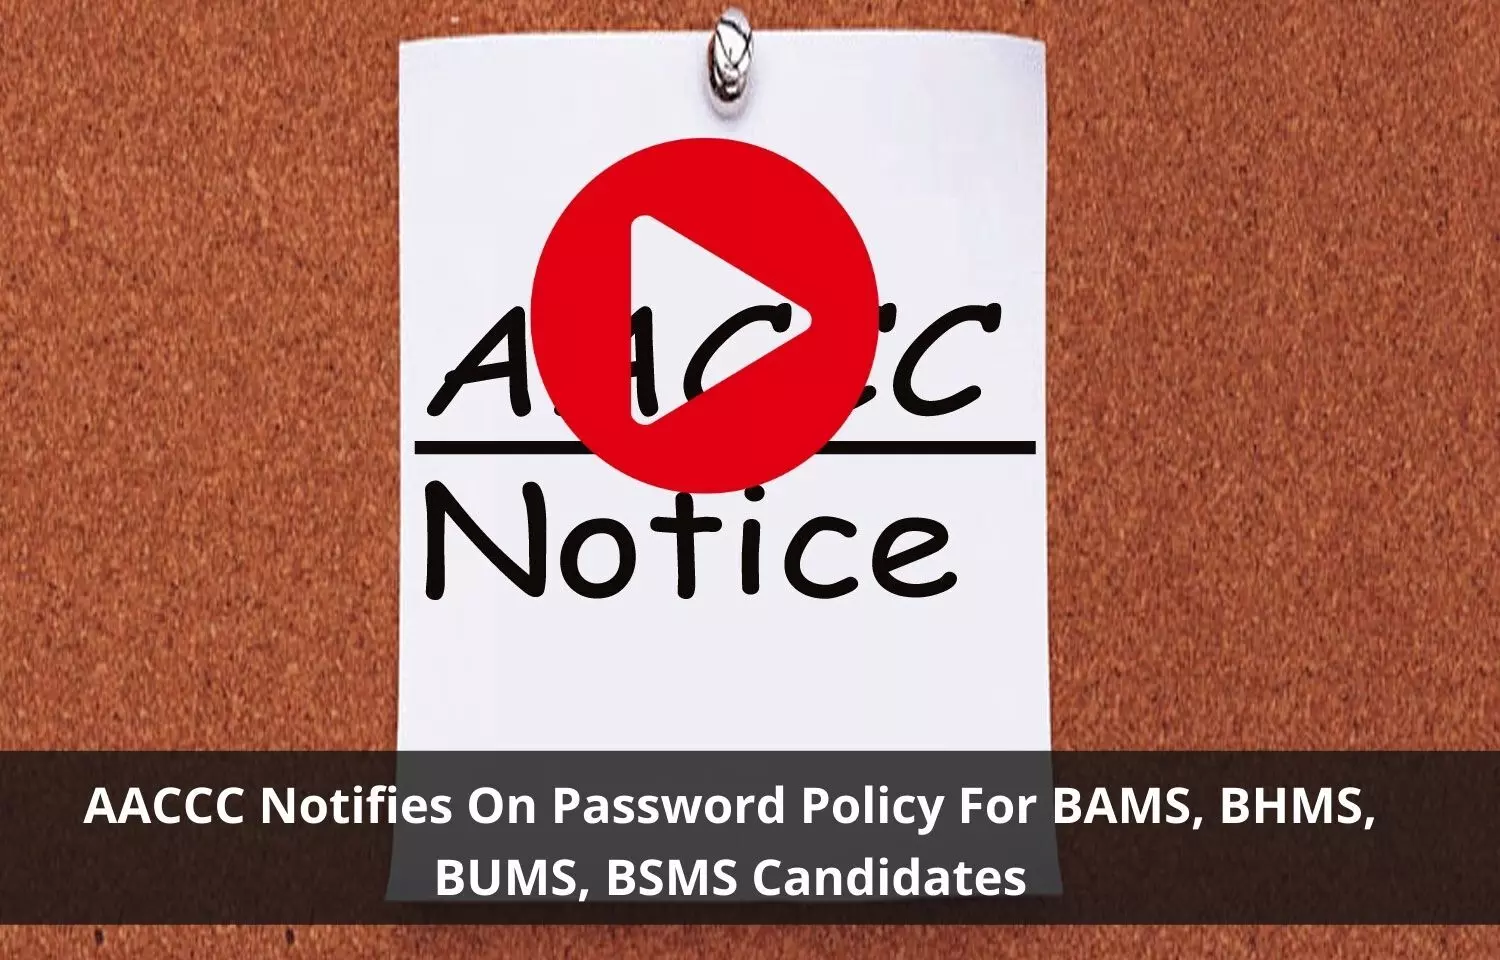 AACCC notifies on password policy for BAMS, BHMS, BUMS, BSMS candidates